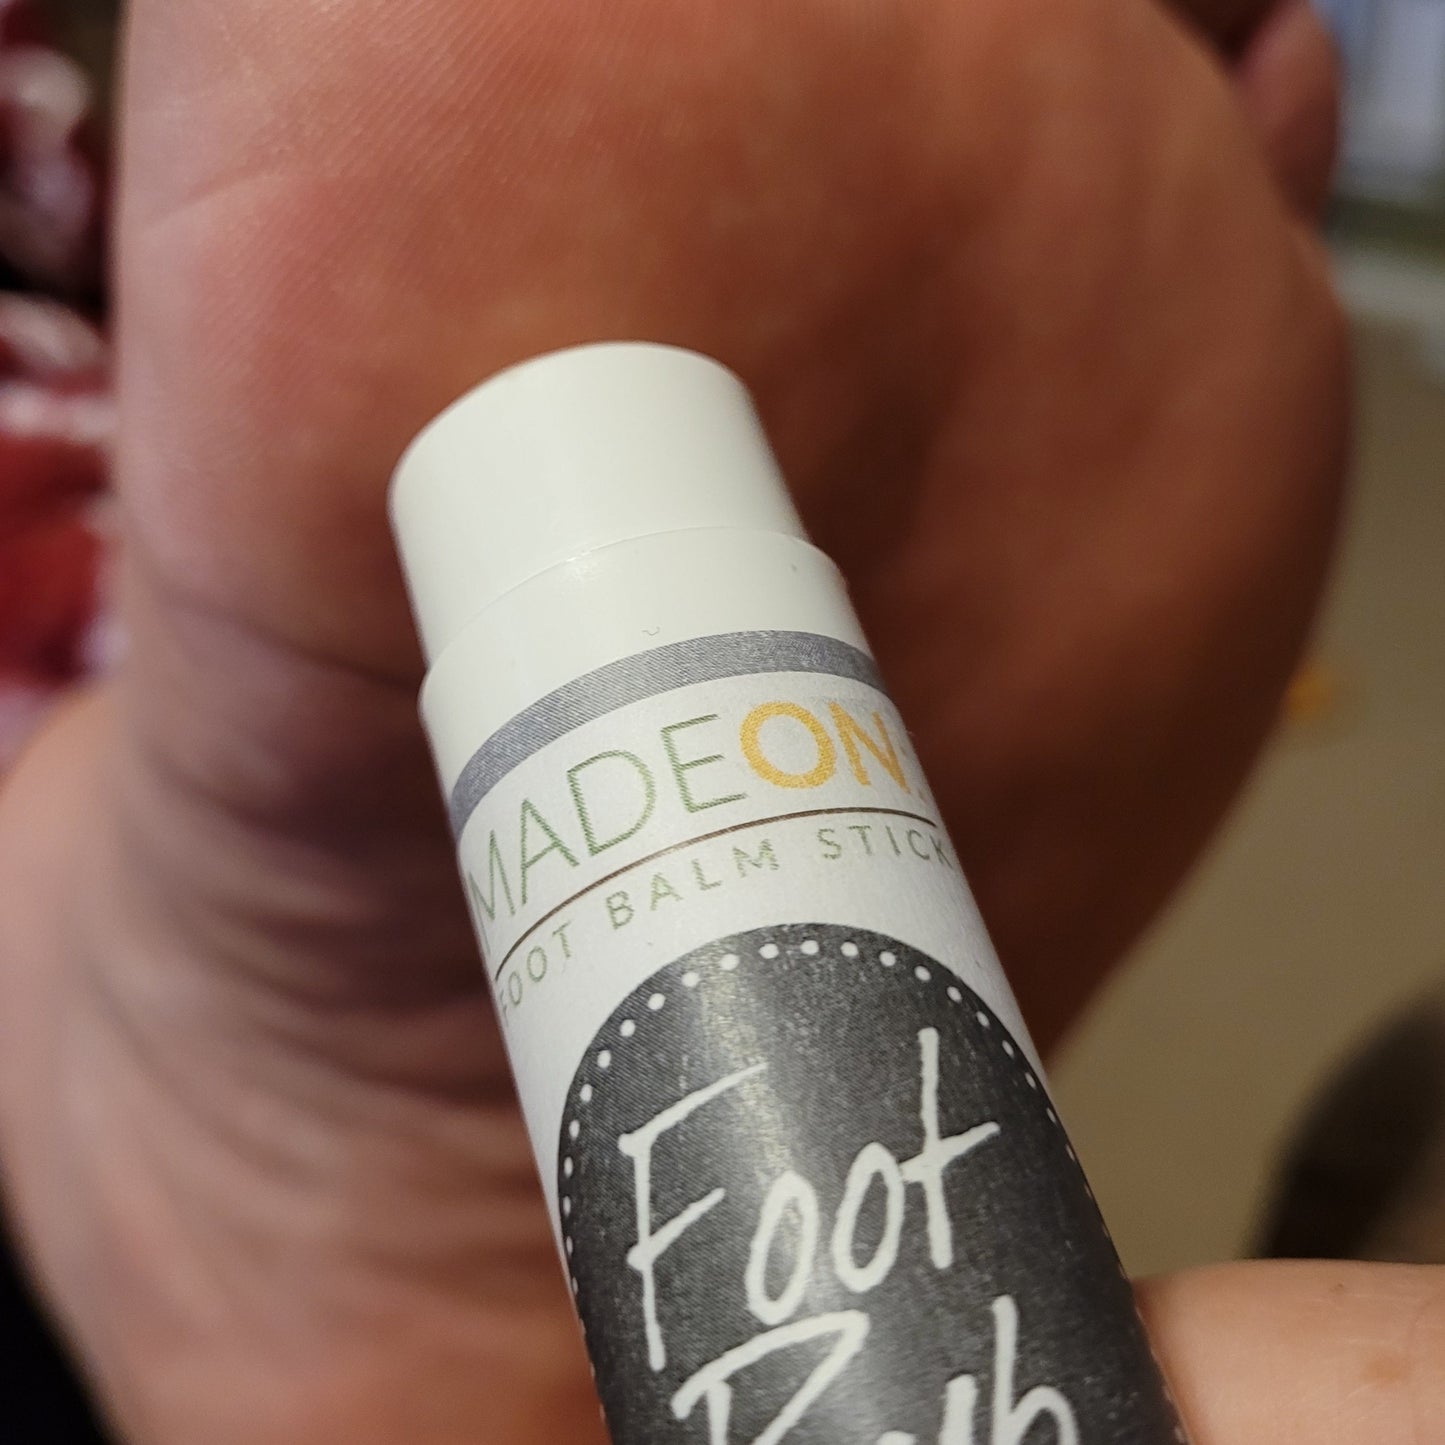 Foot Rub Lotion Stick applied to foot skin issues on bottom of foot